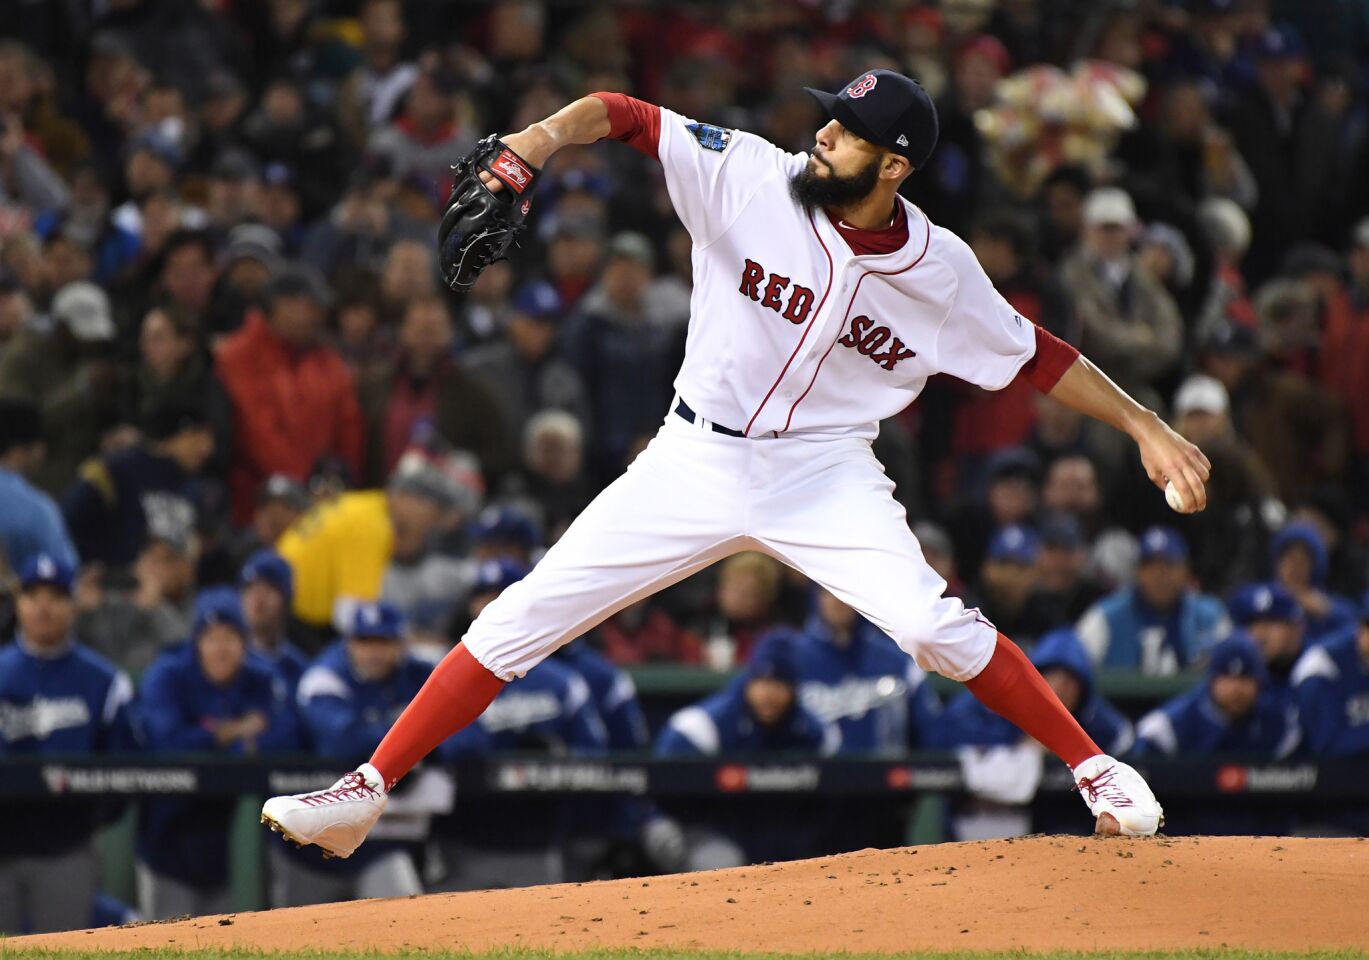 Red Sox pitcher David Price throws in the first inning.